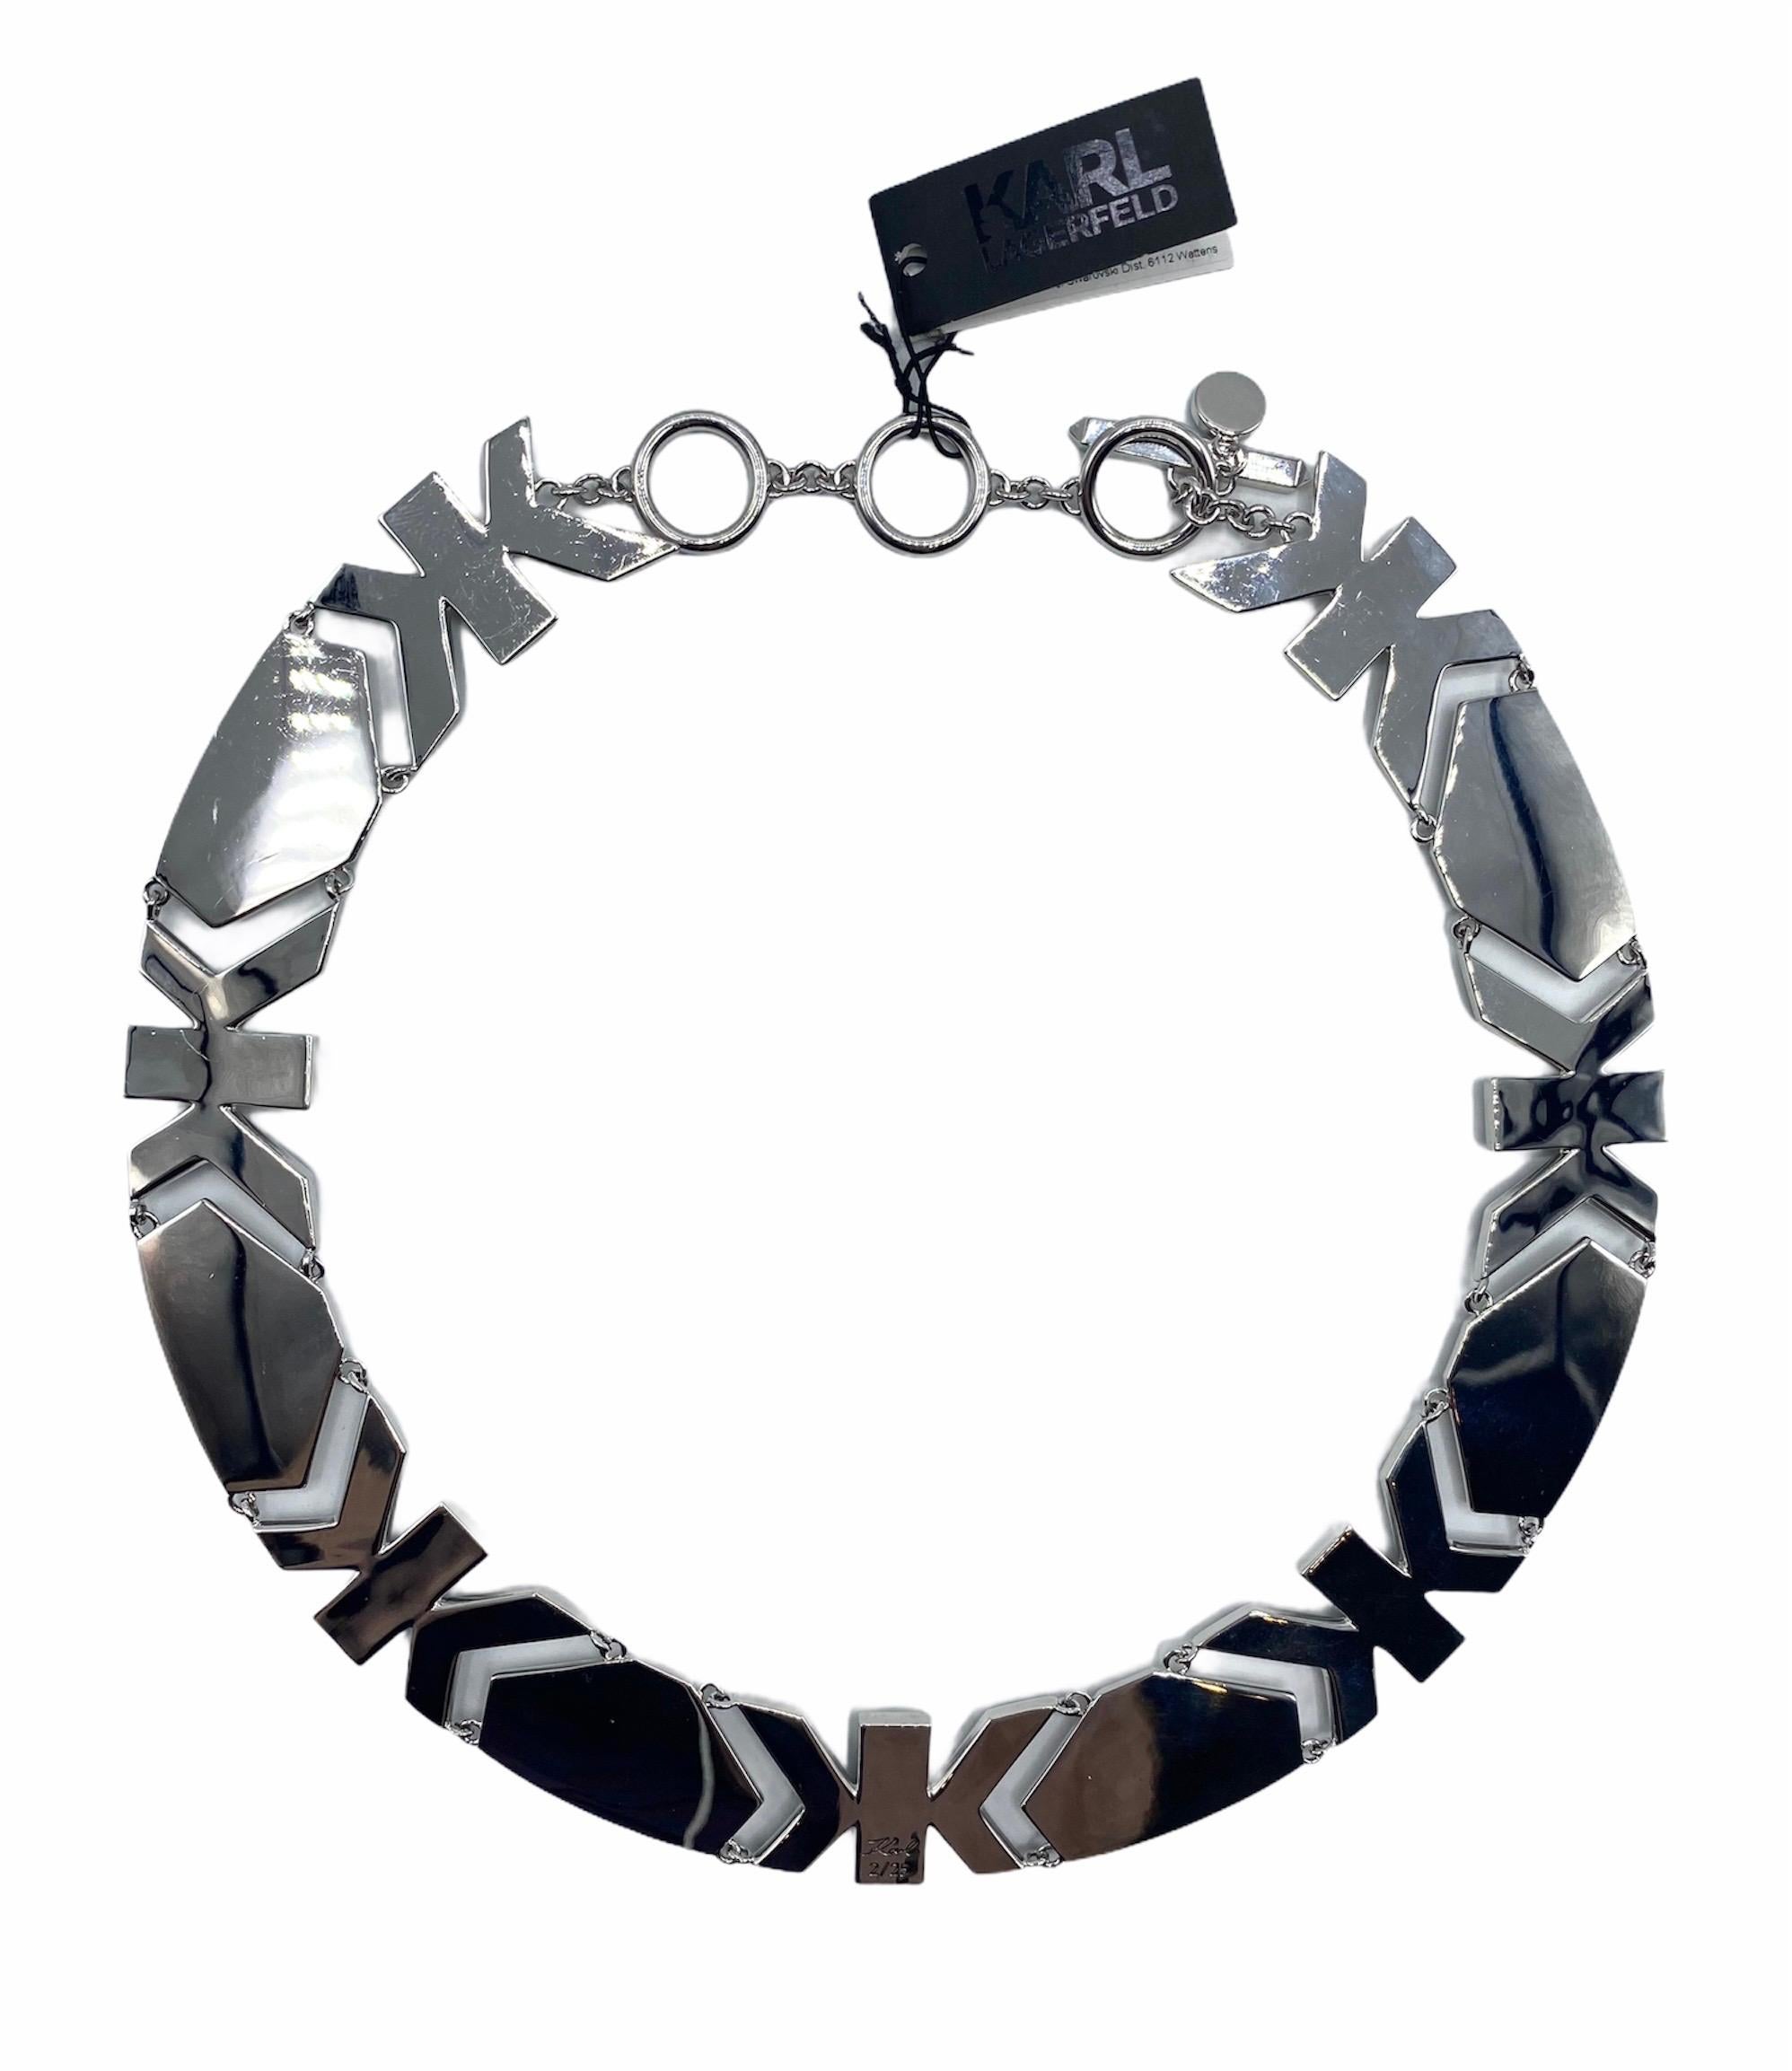 This collar-style necklace is part of an exclusive and limited edition jewelry collection inspired by Karl Lagerfeld's love of Art Deco style. In fact, There are 7 mirror image letter K links incorporated into the design of the necklace. The